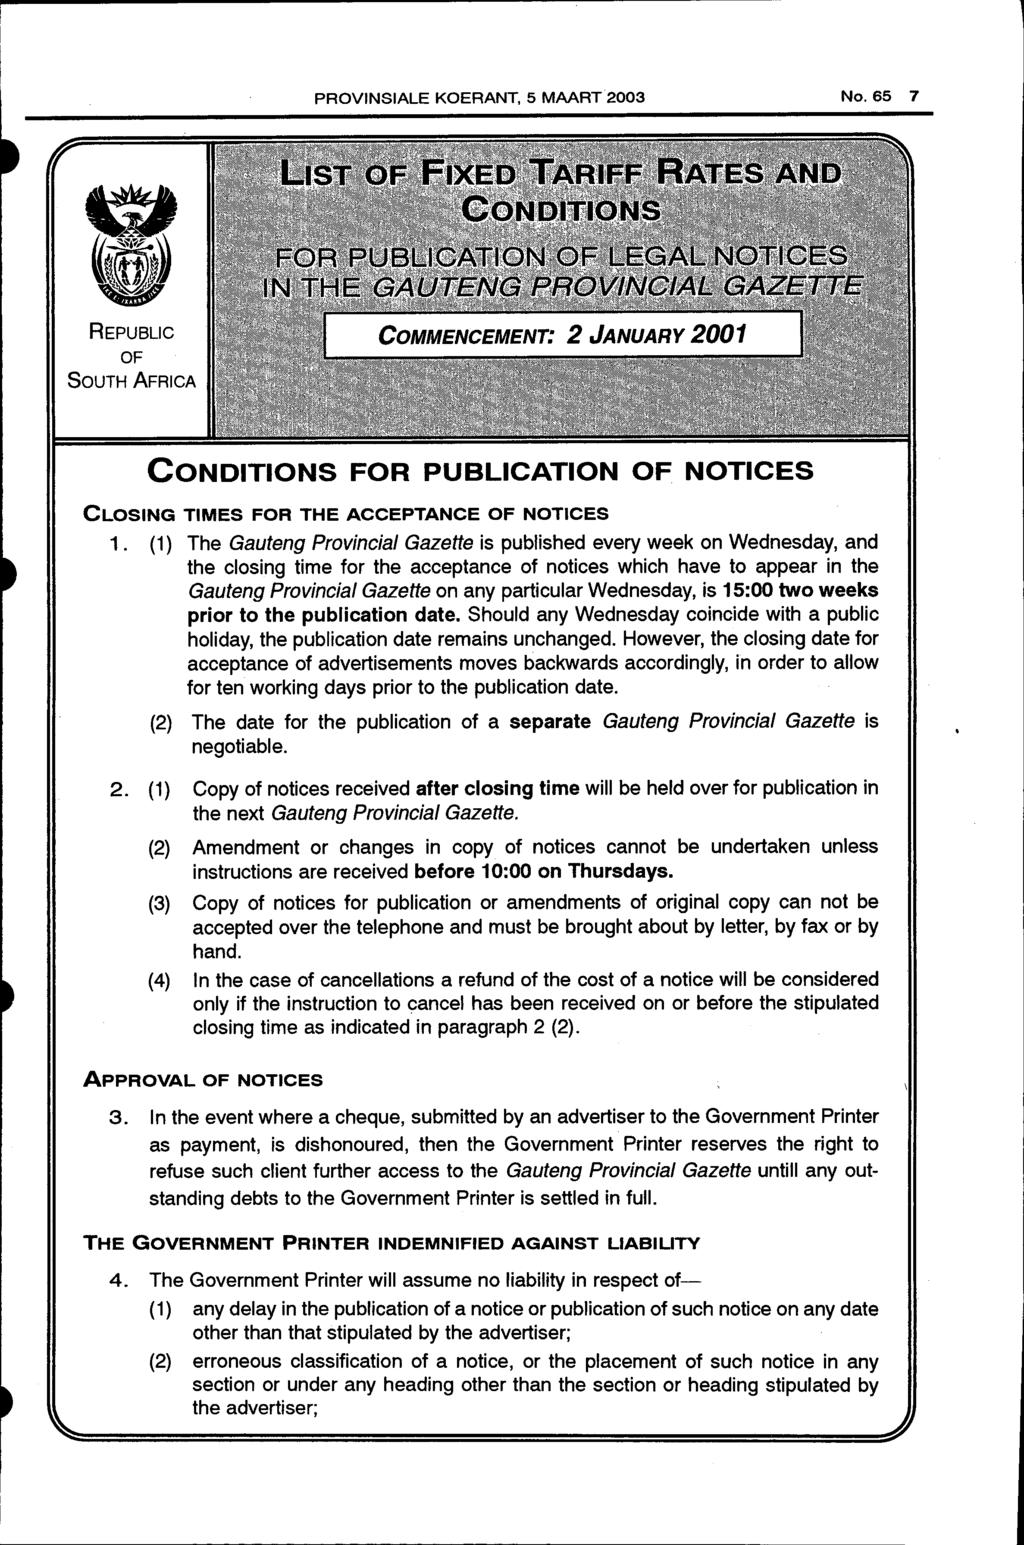 PROVINSIALE KOERANT, 5 MAART 2003 No. 65 7 REPUBLIC OF SouTH AFRICA CONDITIONS FOR PUBLICATION OF NOTICES CLOSING TIMES FOR THE ACCEPTANCE OF NOTICES 1.